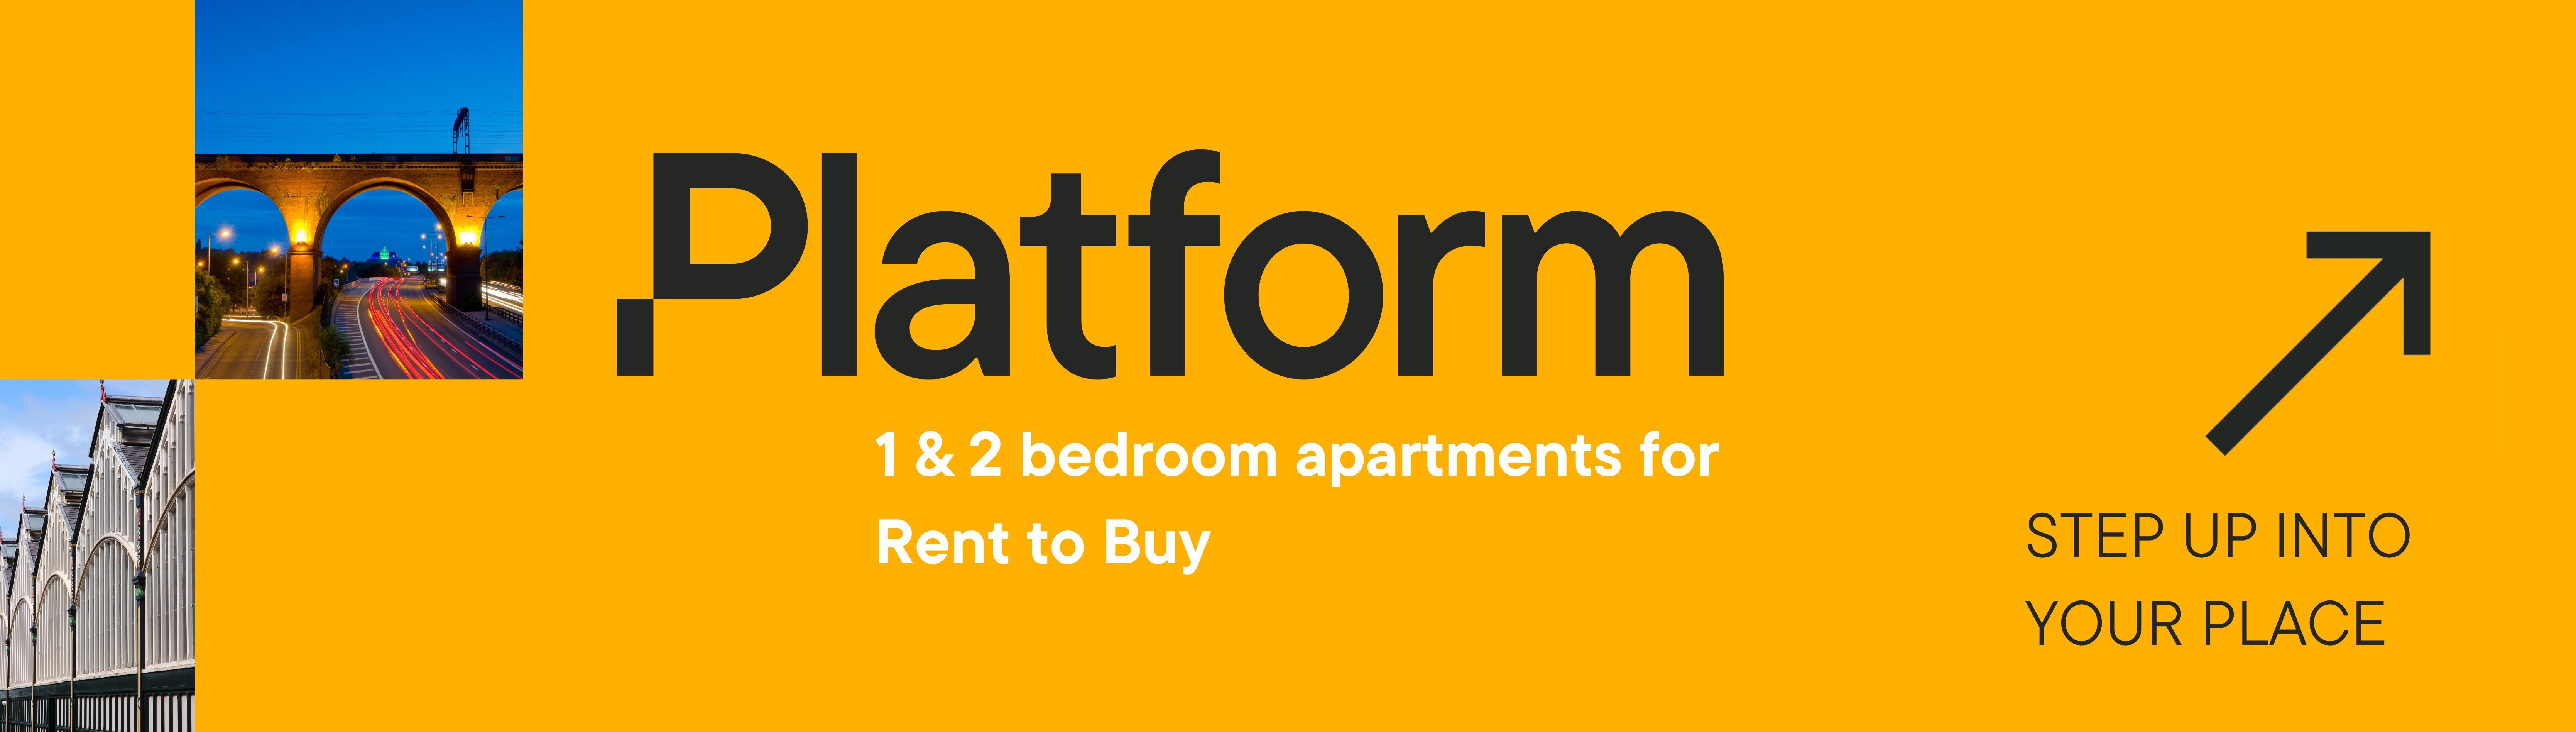 1 & 2 bedroom apartments for rent to buy banner